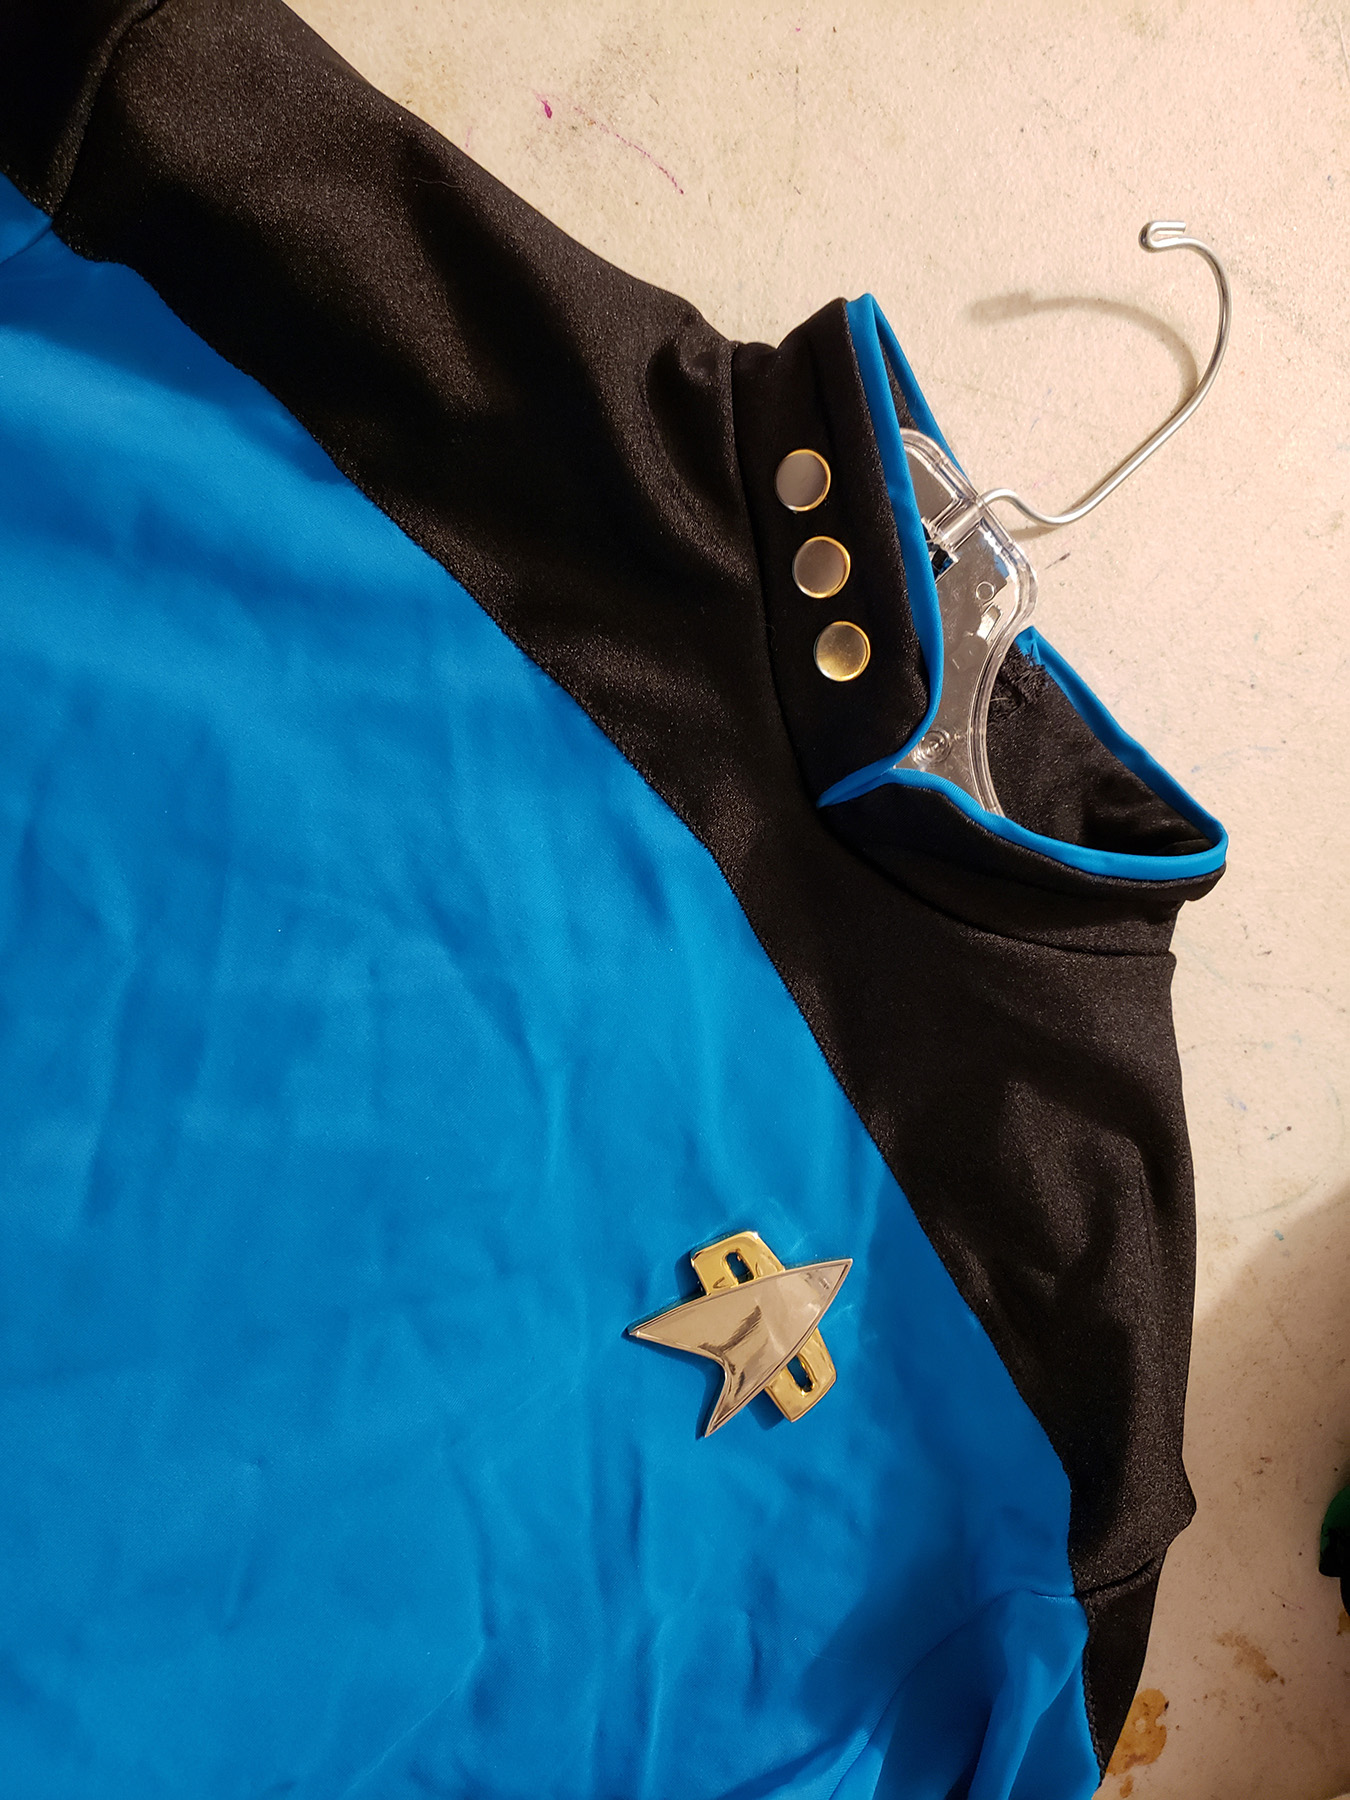 A close up view of a Blue Star Trek skating costume.